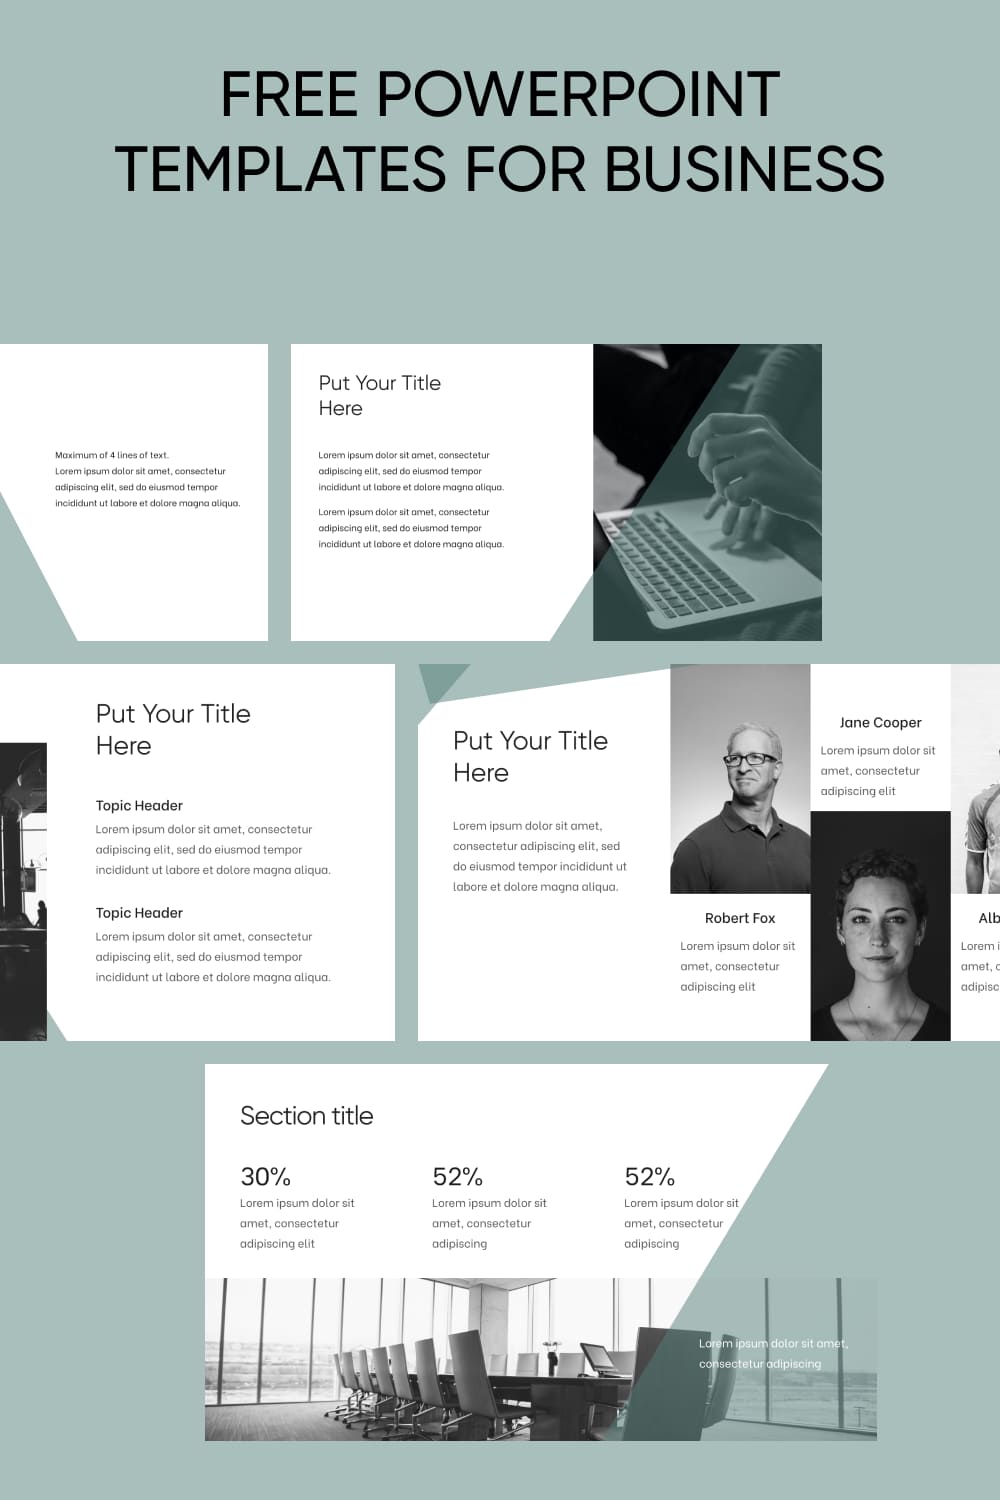 Free Powerpoint Templates For Business Pinterest.